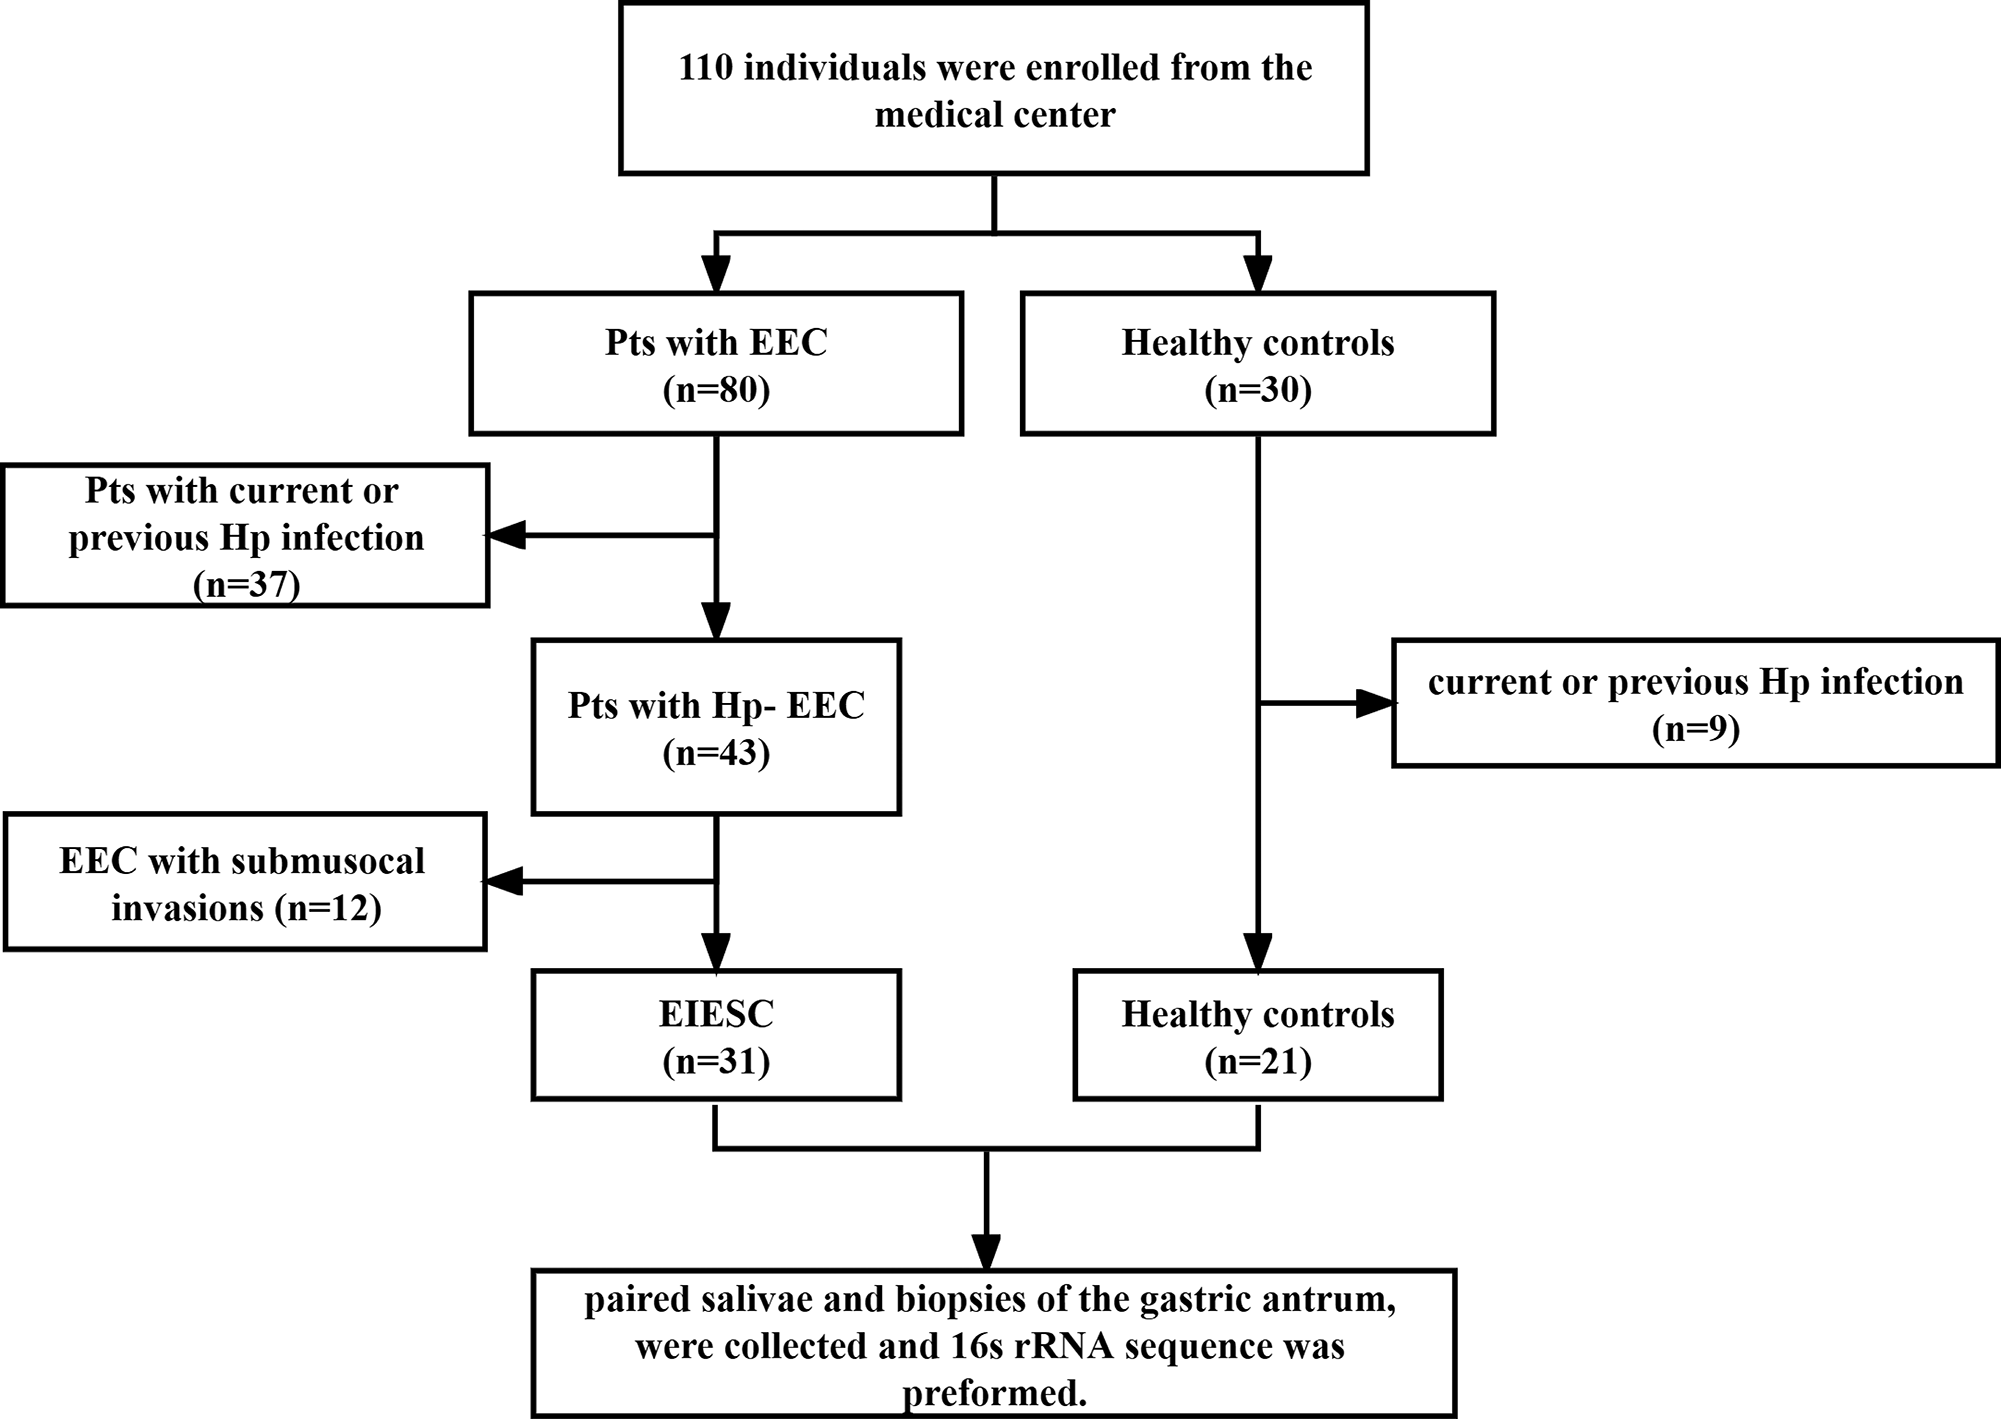 Characteristics of the oral and gastric microbiome in patients with early-stage intramucosal esophageal squamous cell carcinoma